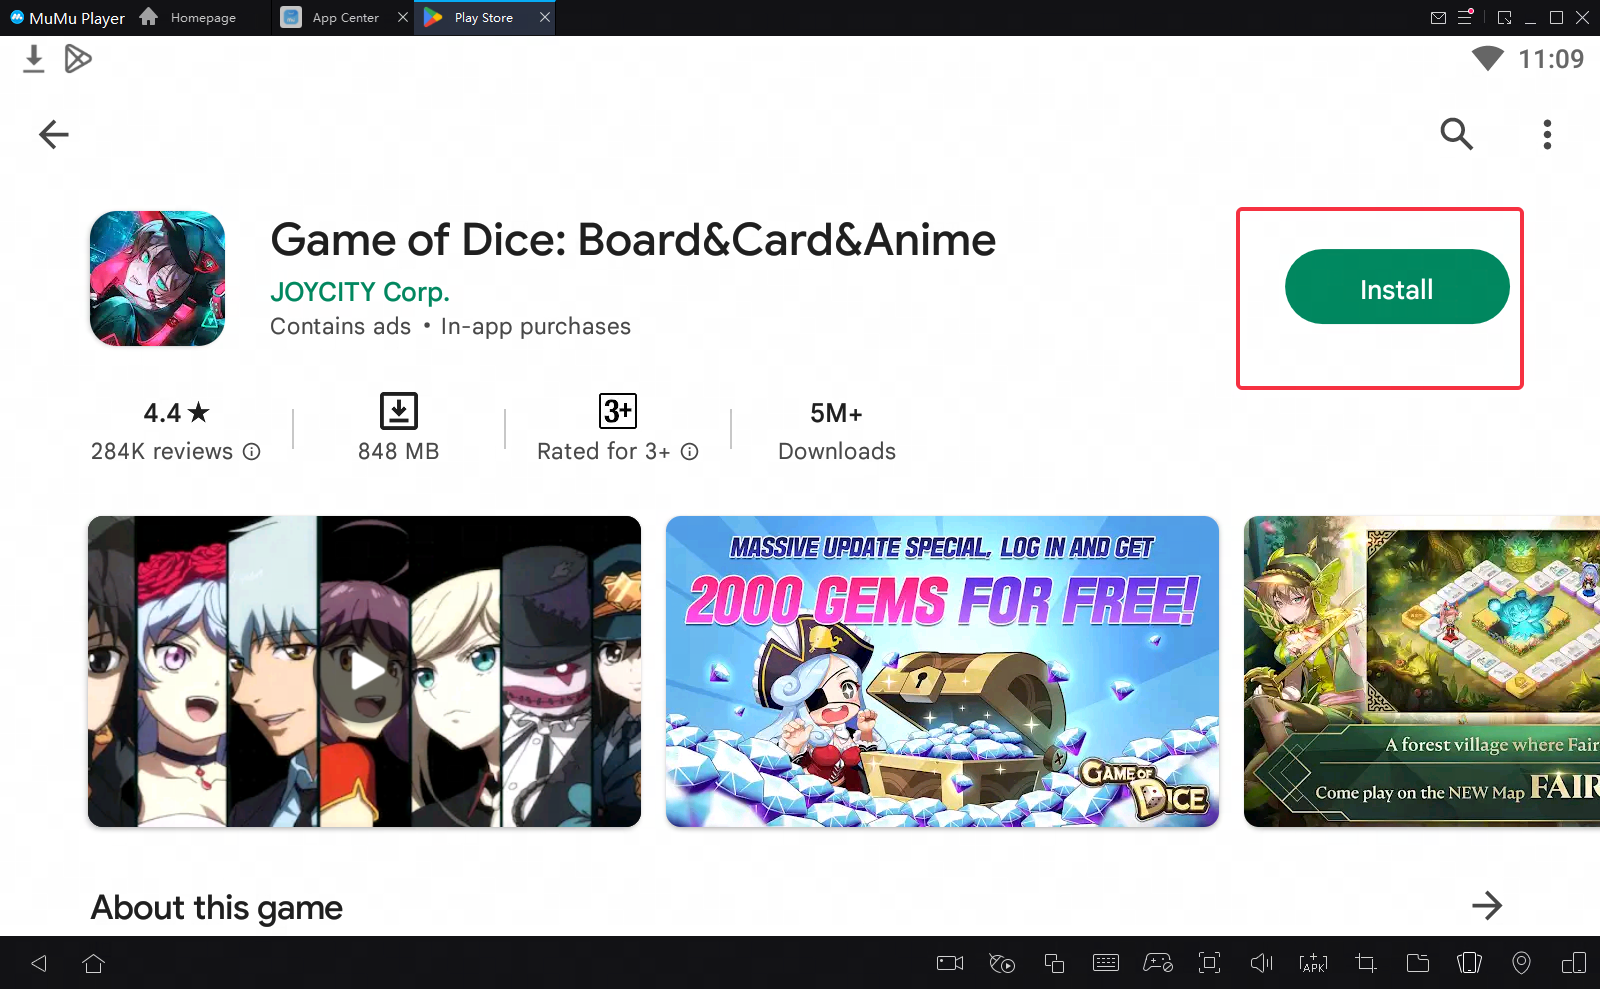 How to Play Game of Dice: Board&Card&Anime on PC